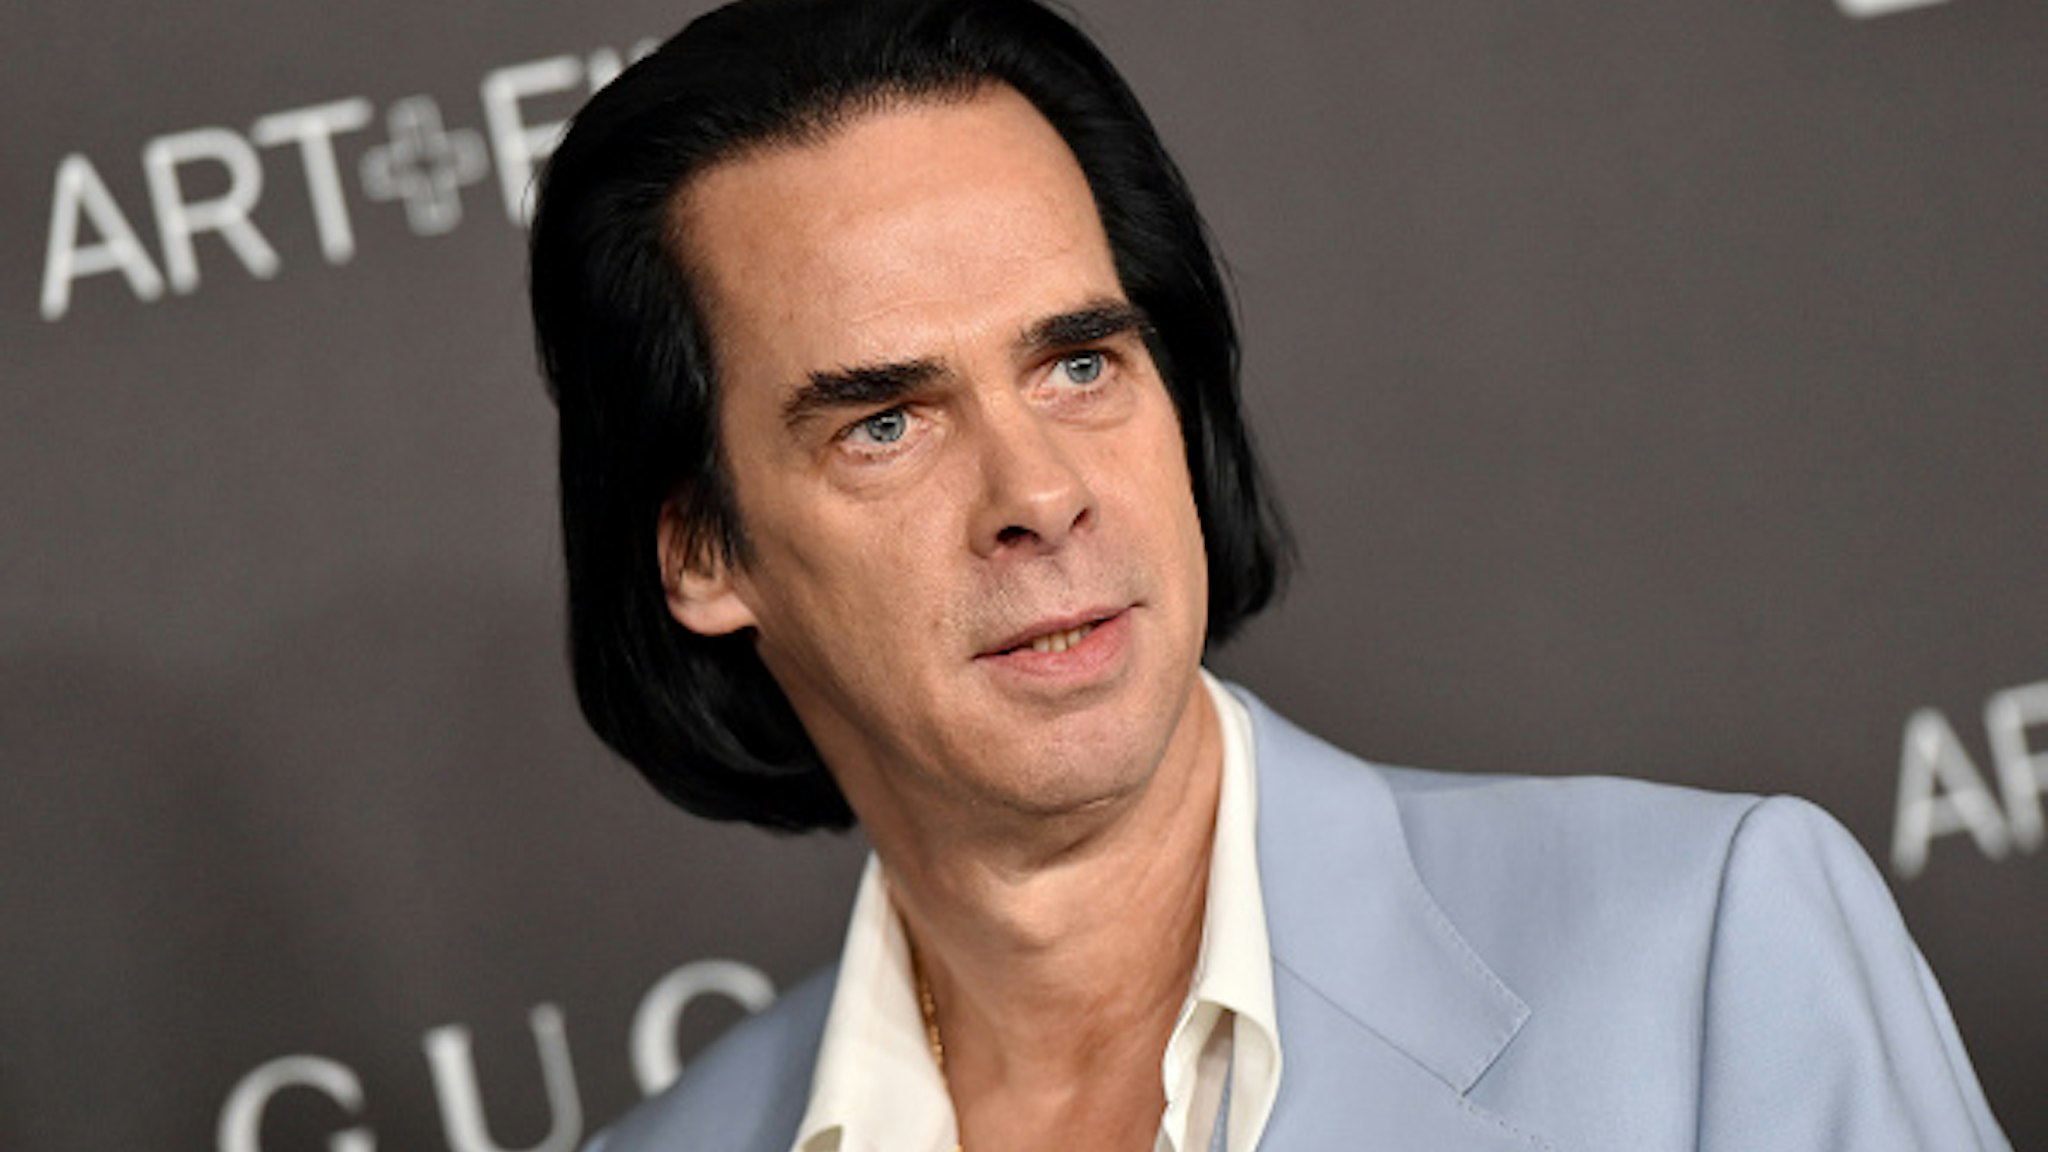 LOS ANGELES, CALIFORNIA - NOVEMBER 02: Nick Cave attends the 2019 LACMA Art + Film Gala Presented By Gucci on November 02, 2019 in Los Angeles, California.